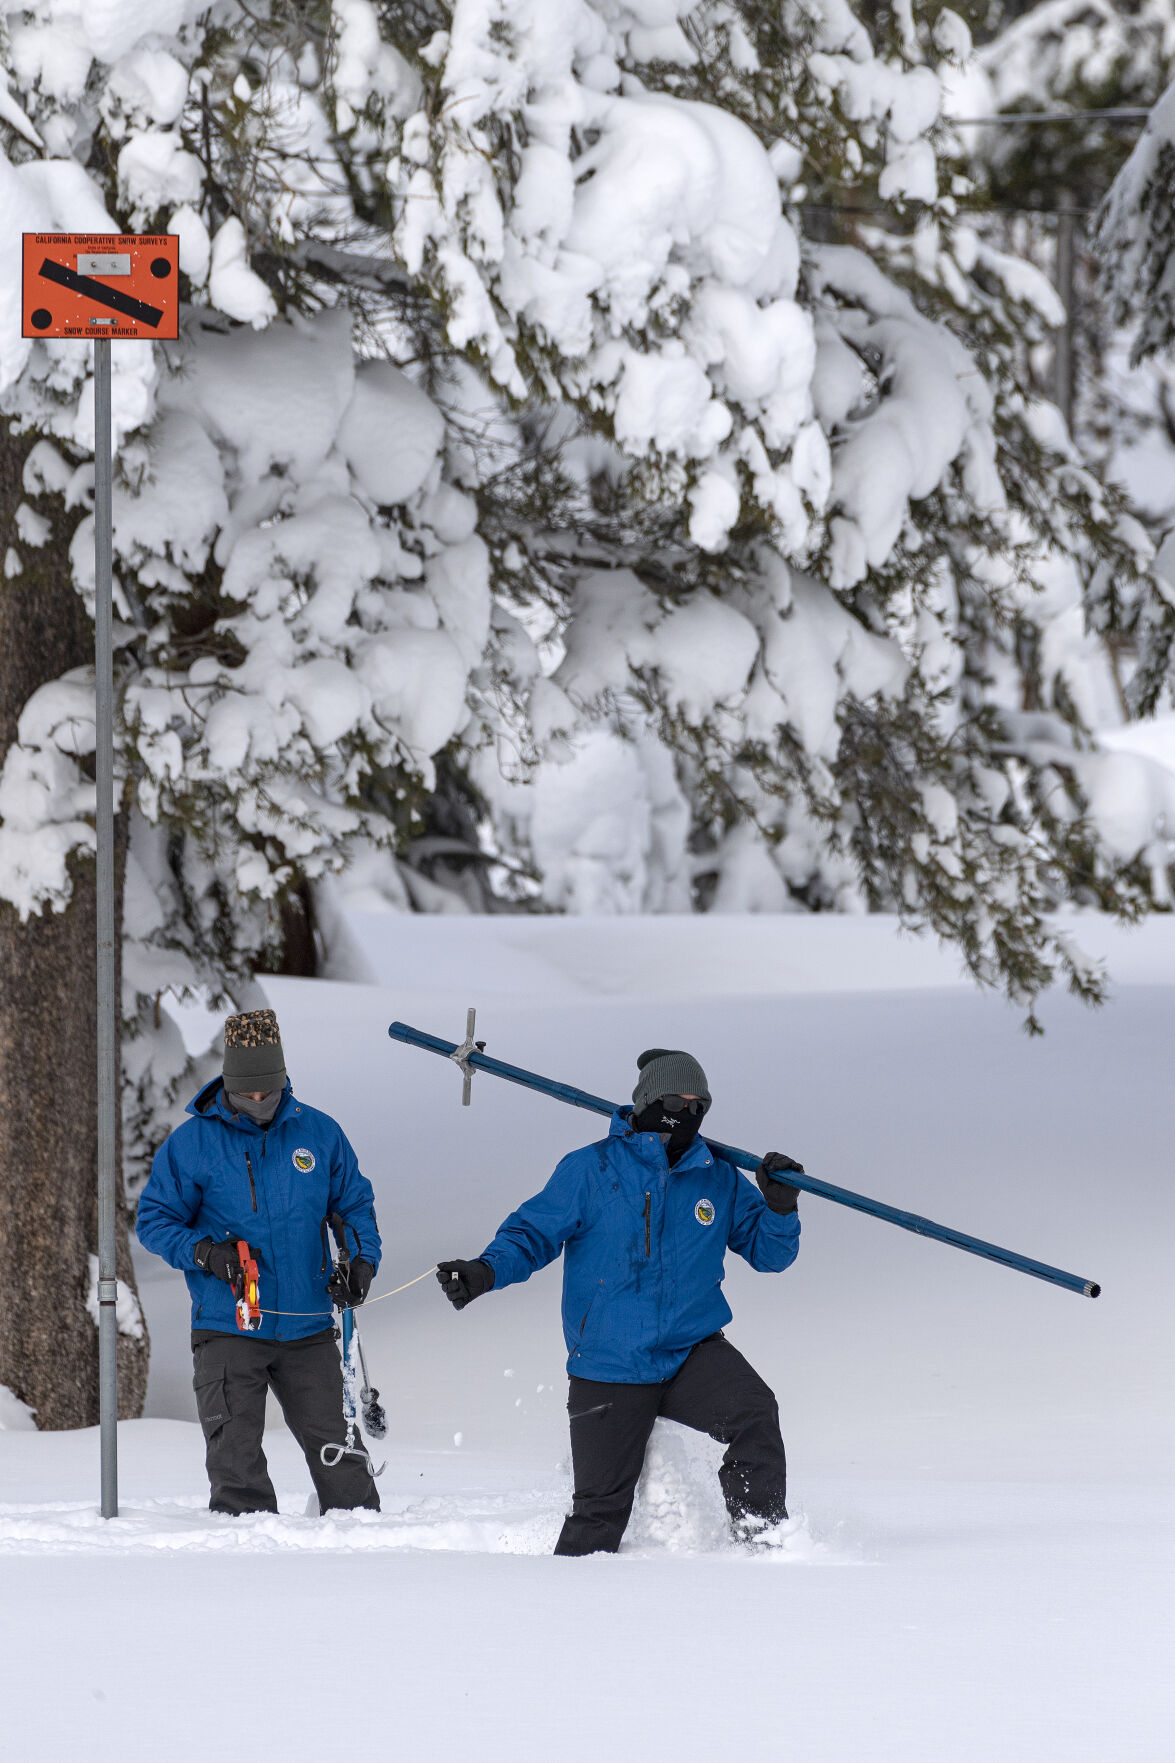 Early winter storms provide much-needed Sierra snowpack